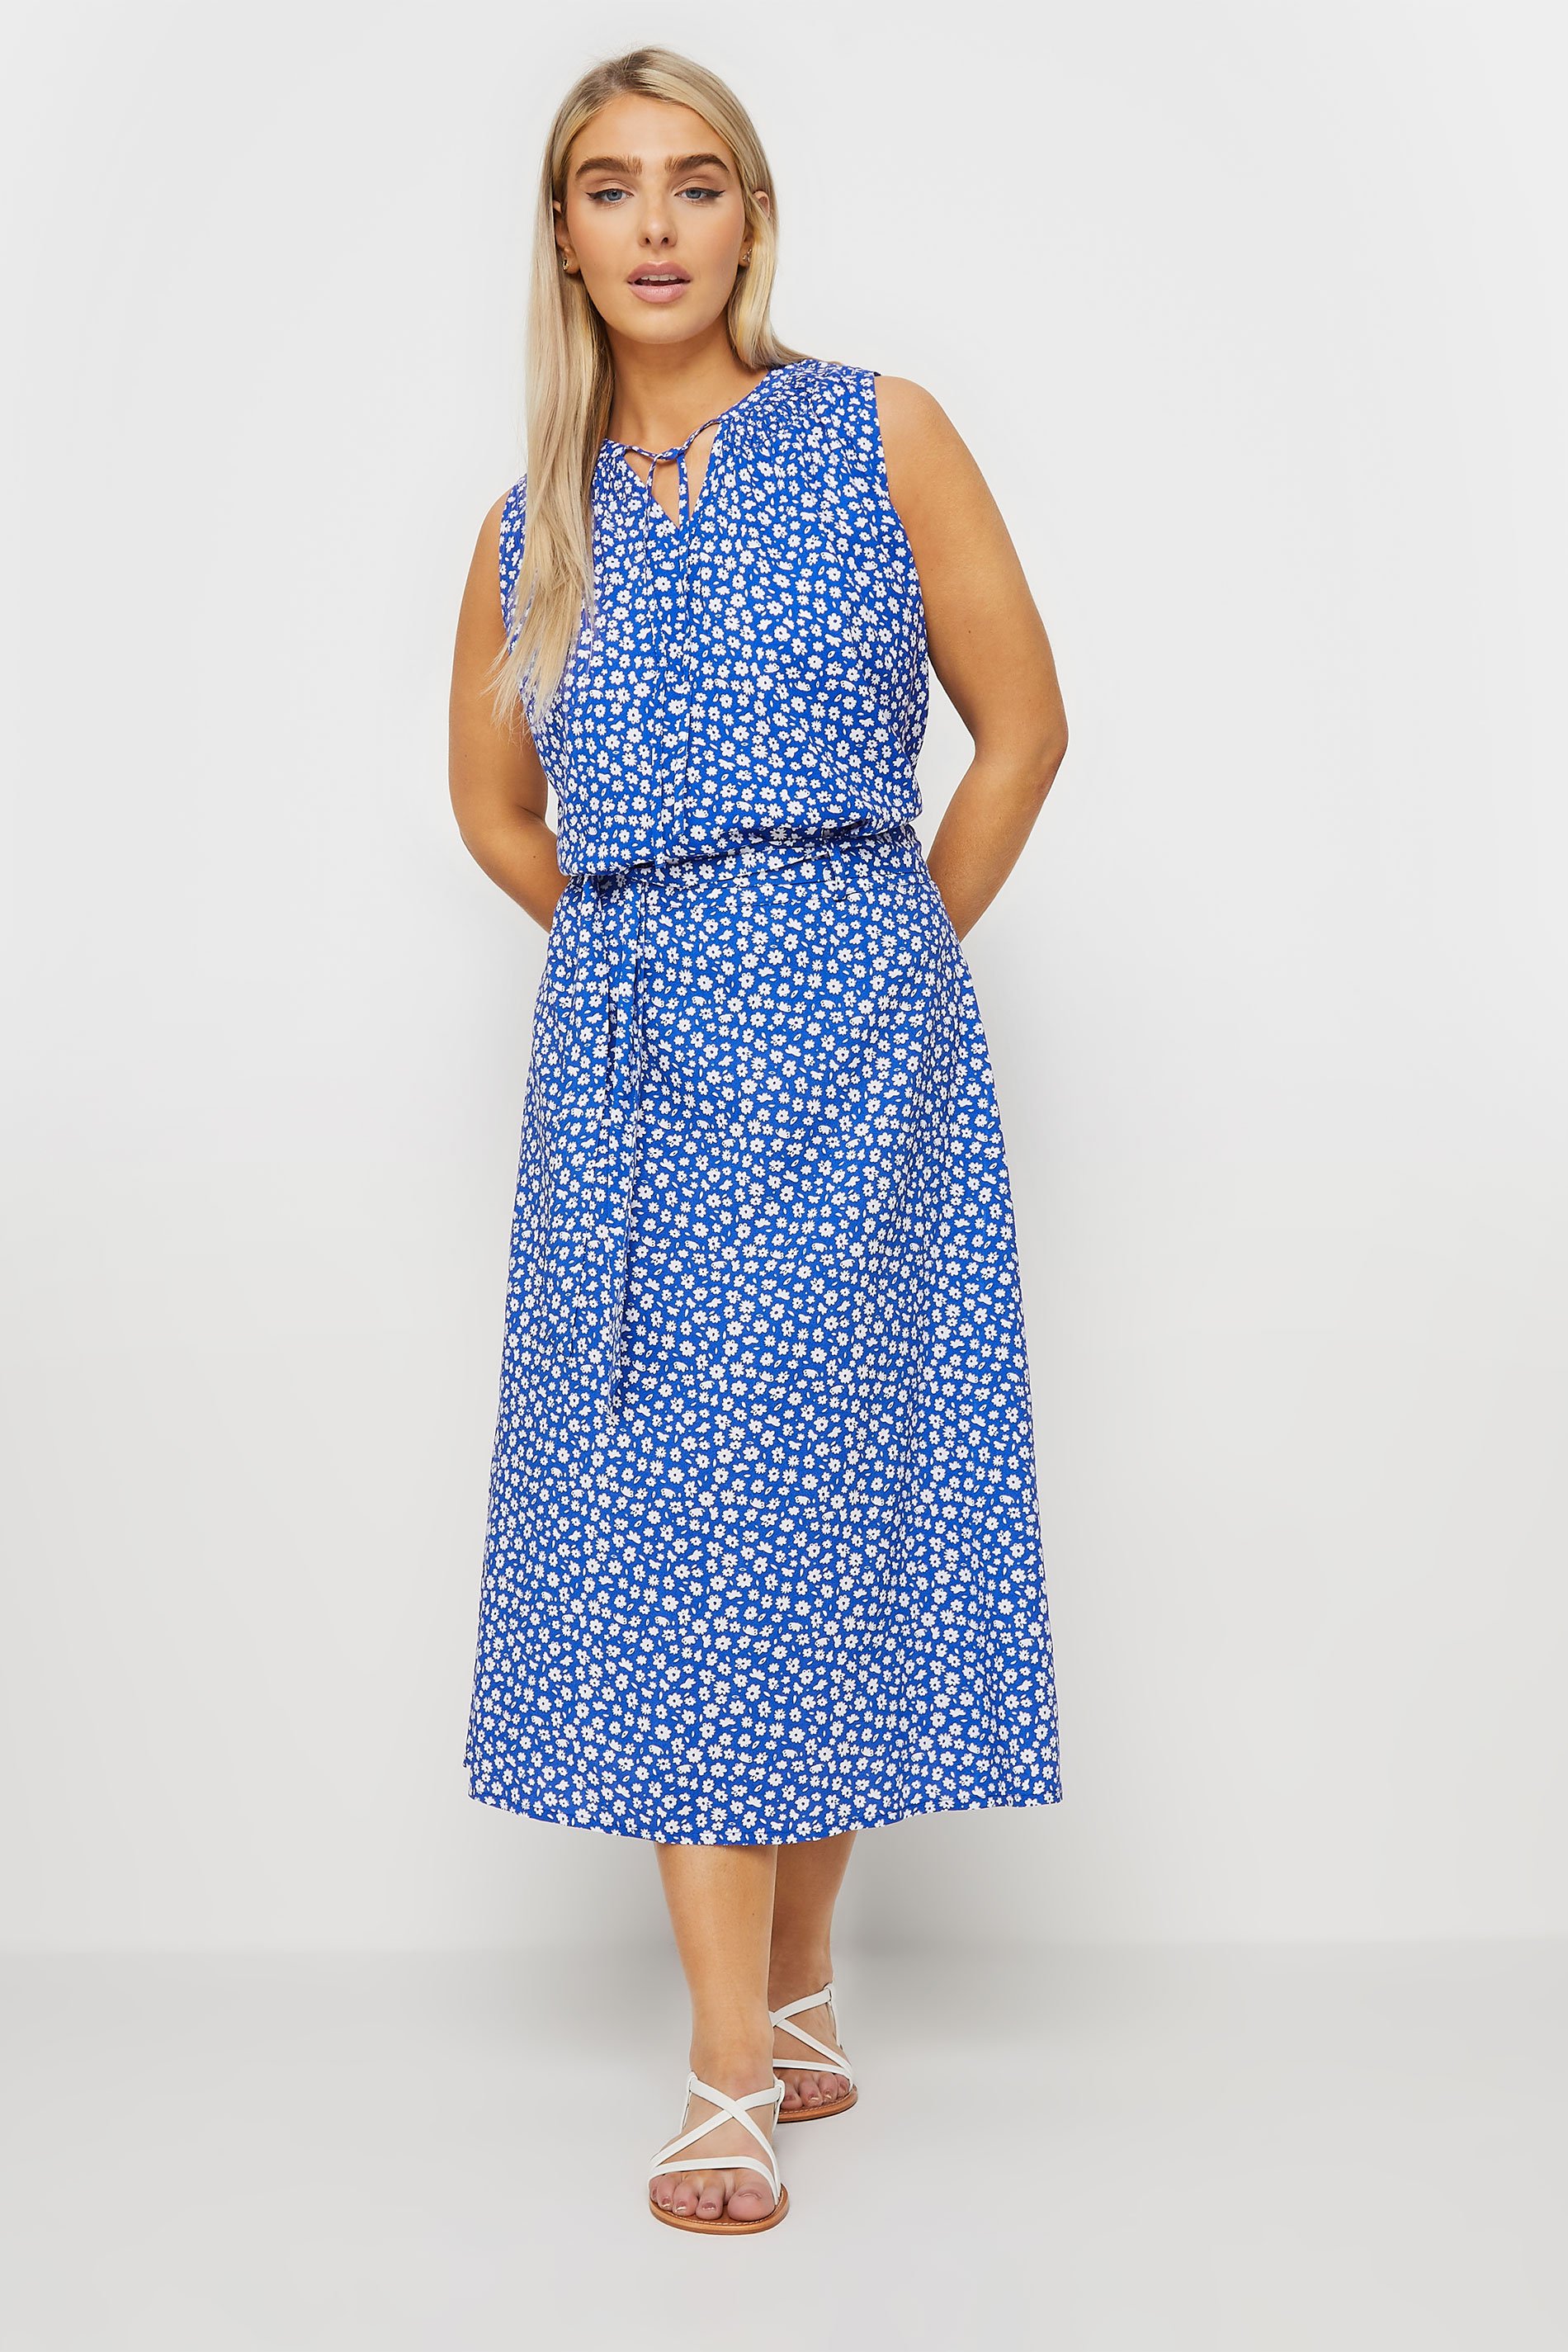 M&Co Blue Ditsy Floral Print Belted Midi Skirt | M&Co 2